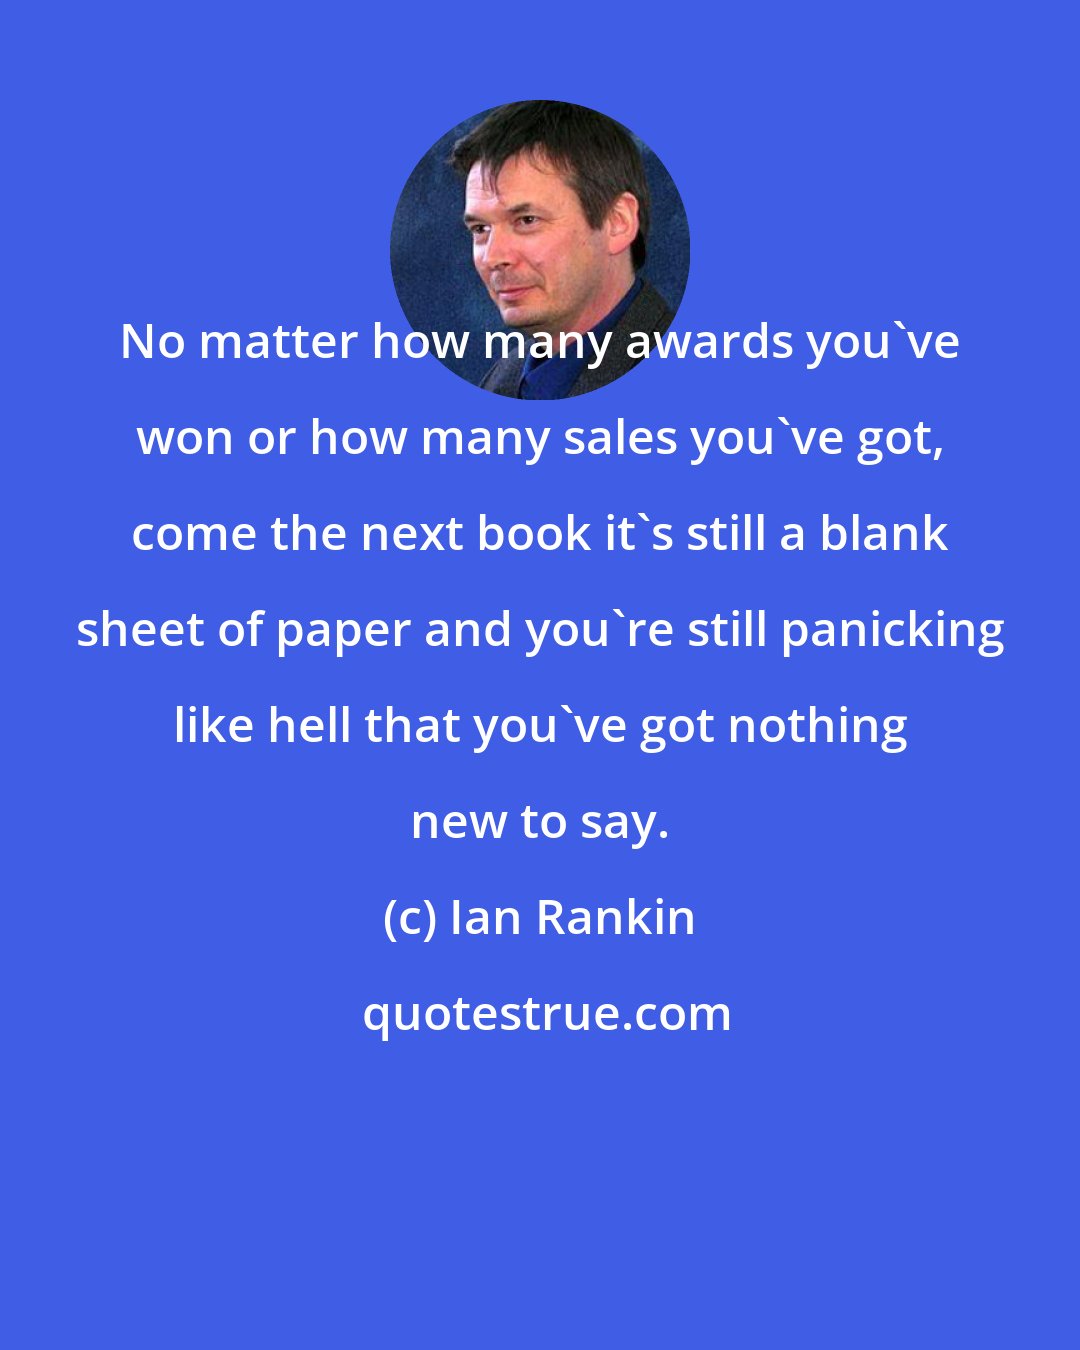 Ian Rankin: No matter how many awards you've won or how many sales you've got, come the next book it's still a blank sheet of paper and you're still panicking like hell that you've got nothing new to say.